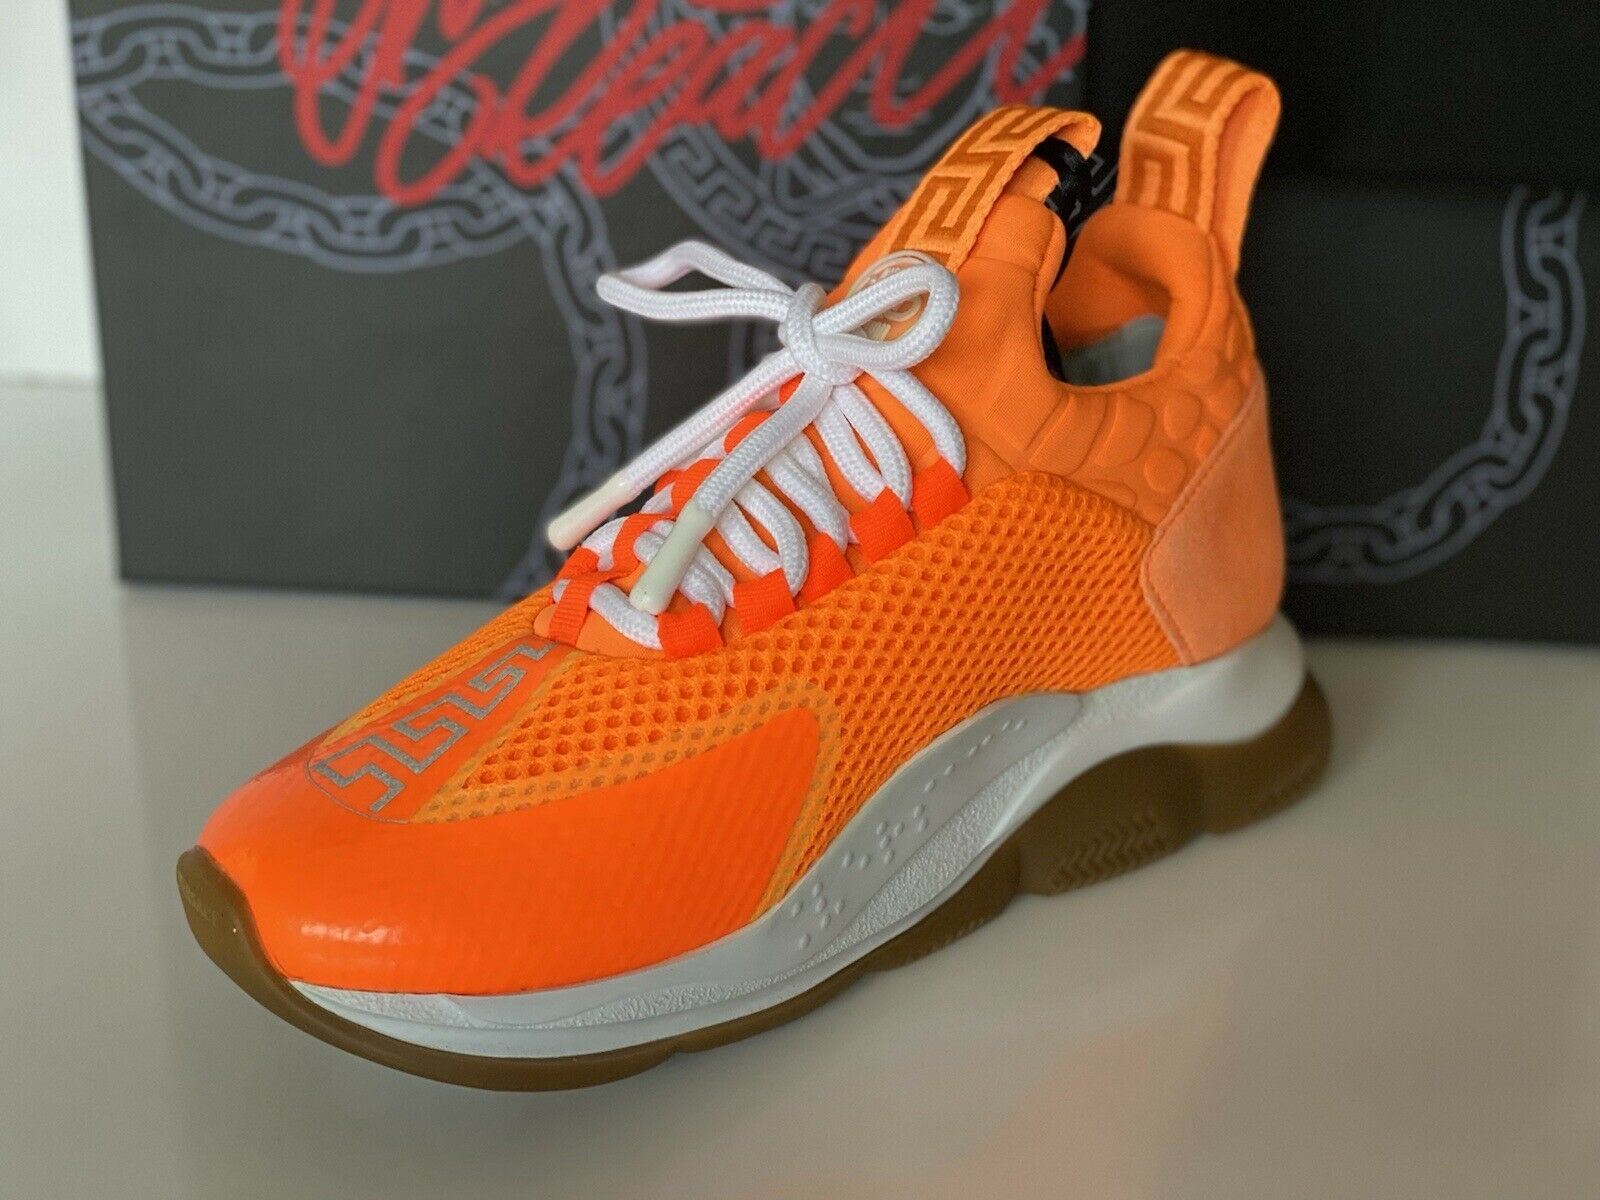 NIB Versace Orange Sparkle Chain Reaction Sneakers 6 US (36 EU) Made in Italy